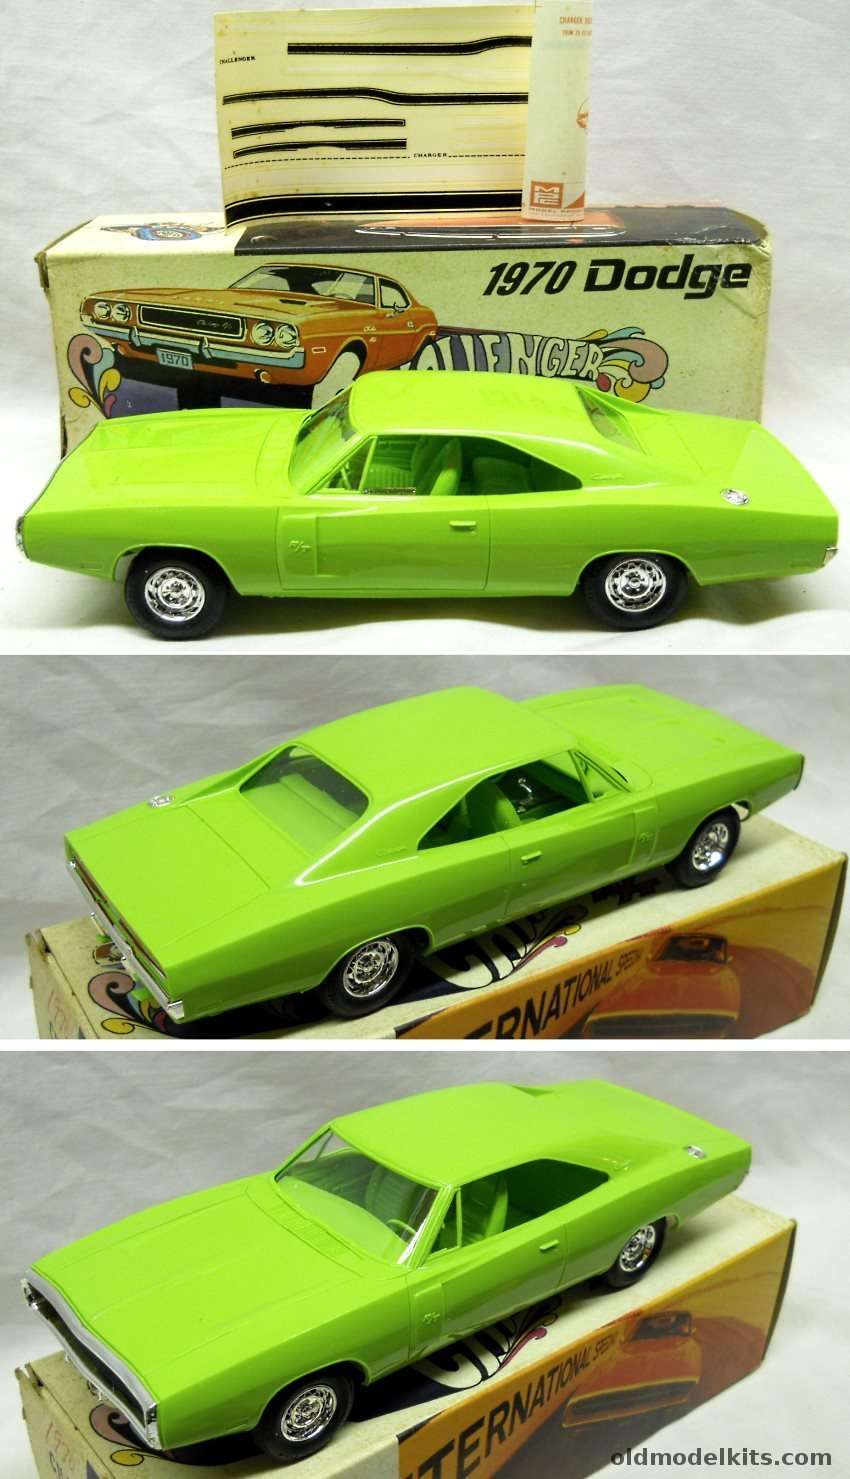 MPC 1/25 1970 Dodge Charger Sub Lime Promo With Original Box and Decals plastic model kit